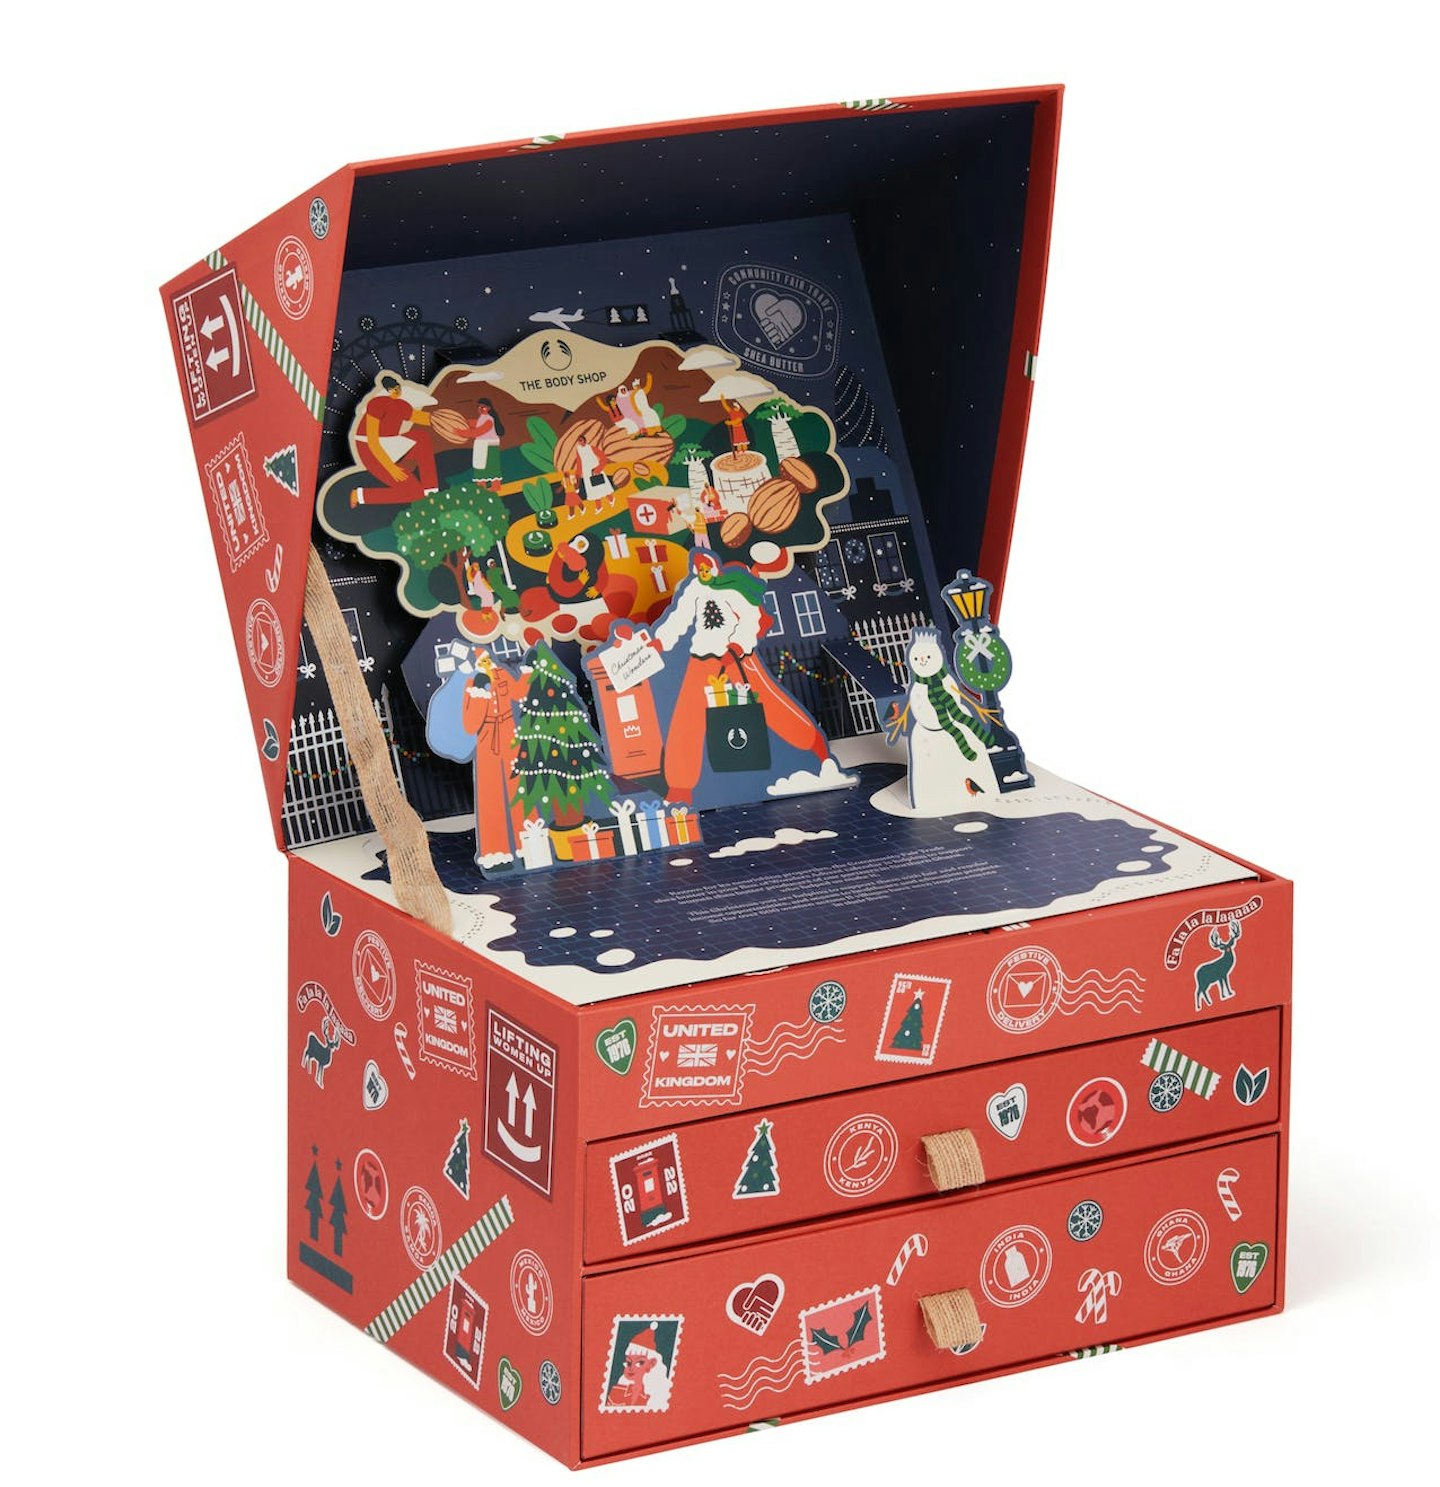 The Body Shop The Advent Calendars of Wonders